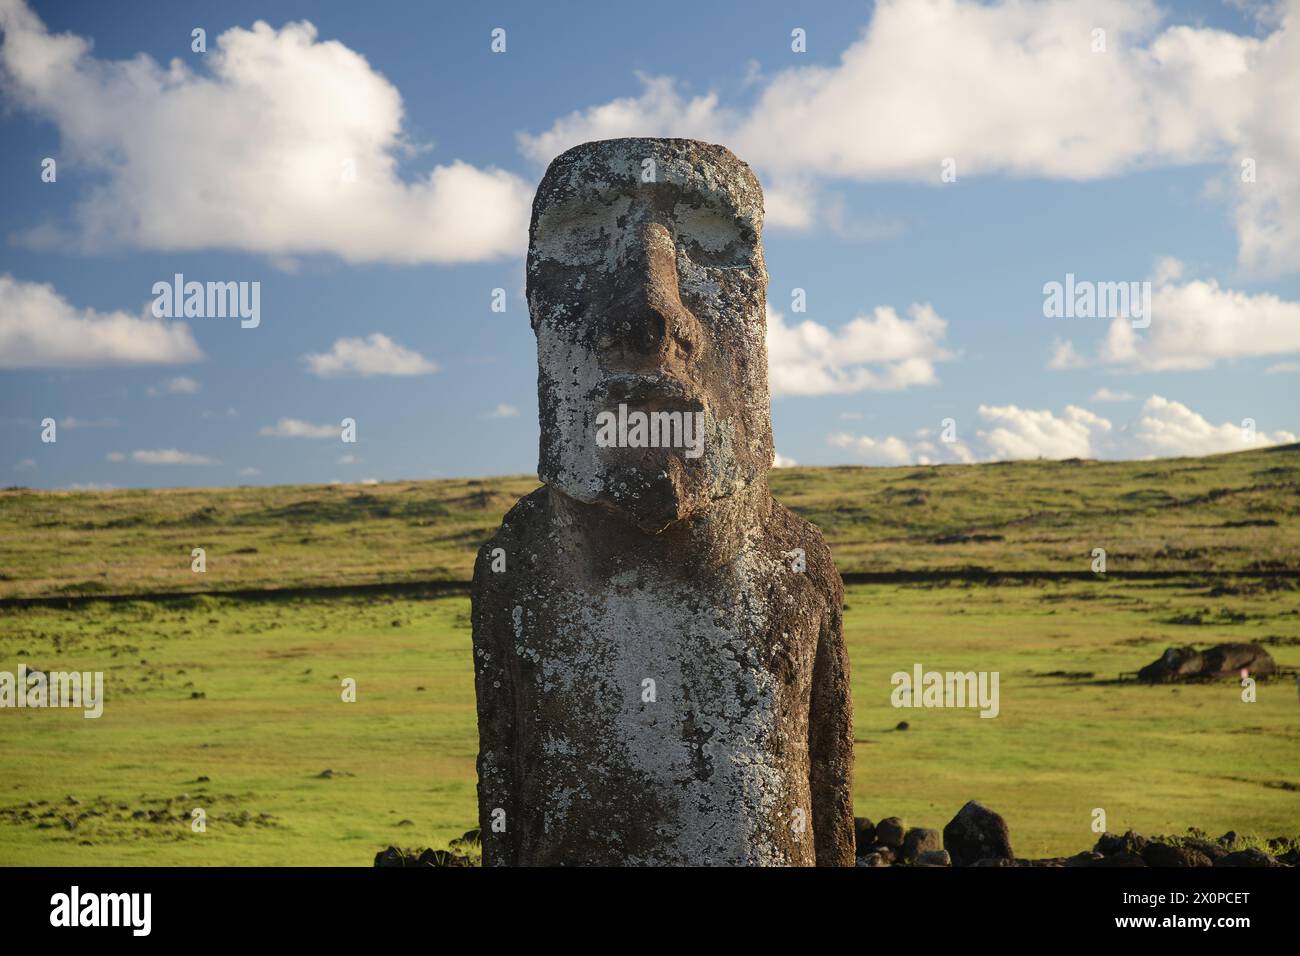 A large statue of a man stands in a grassy field. The statue is covered in white powder, giving it a weathered appearance. The sky above is cloudy, cr Stock Photo